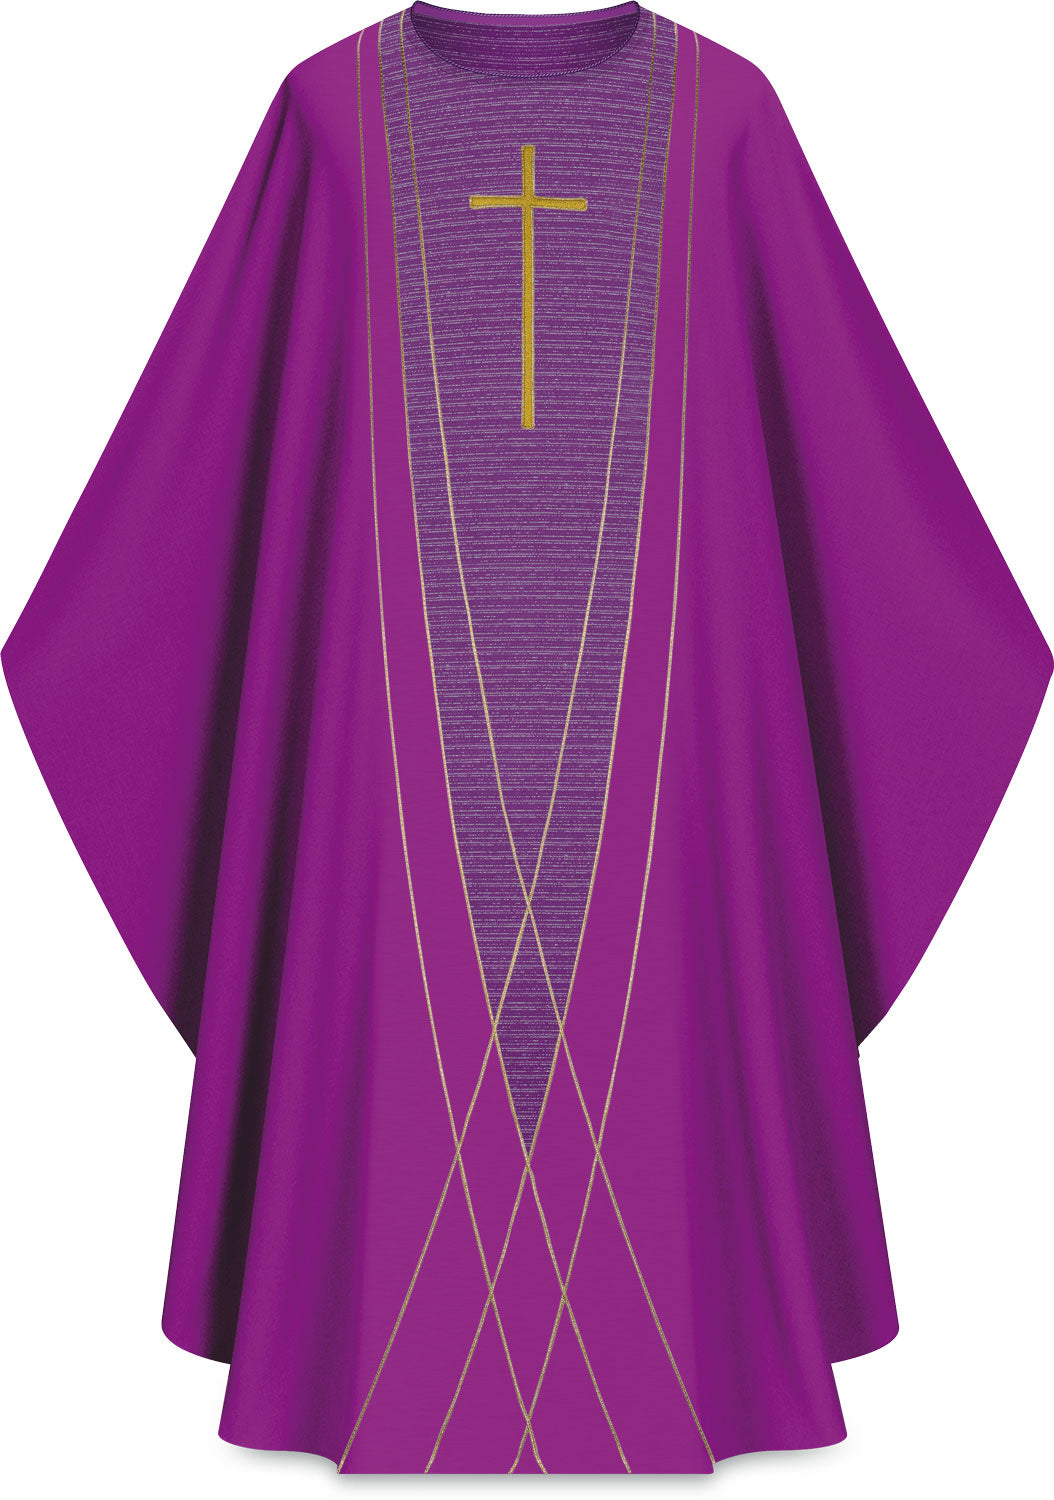 chasuble-purple-embroidered-gold-lines-5168.jpg